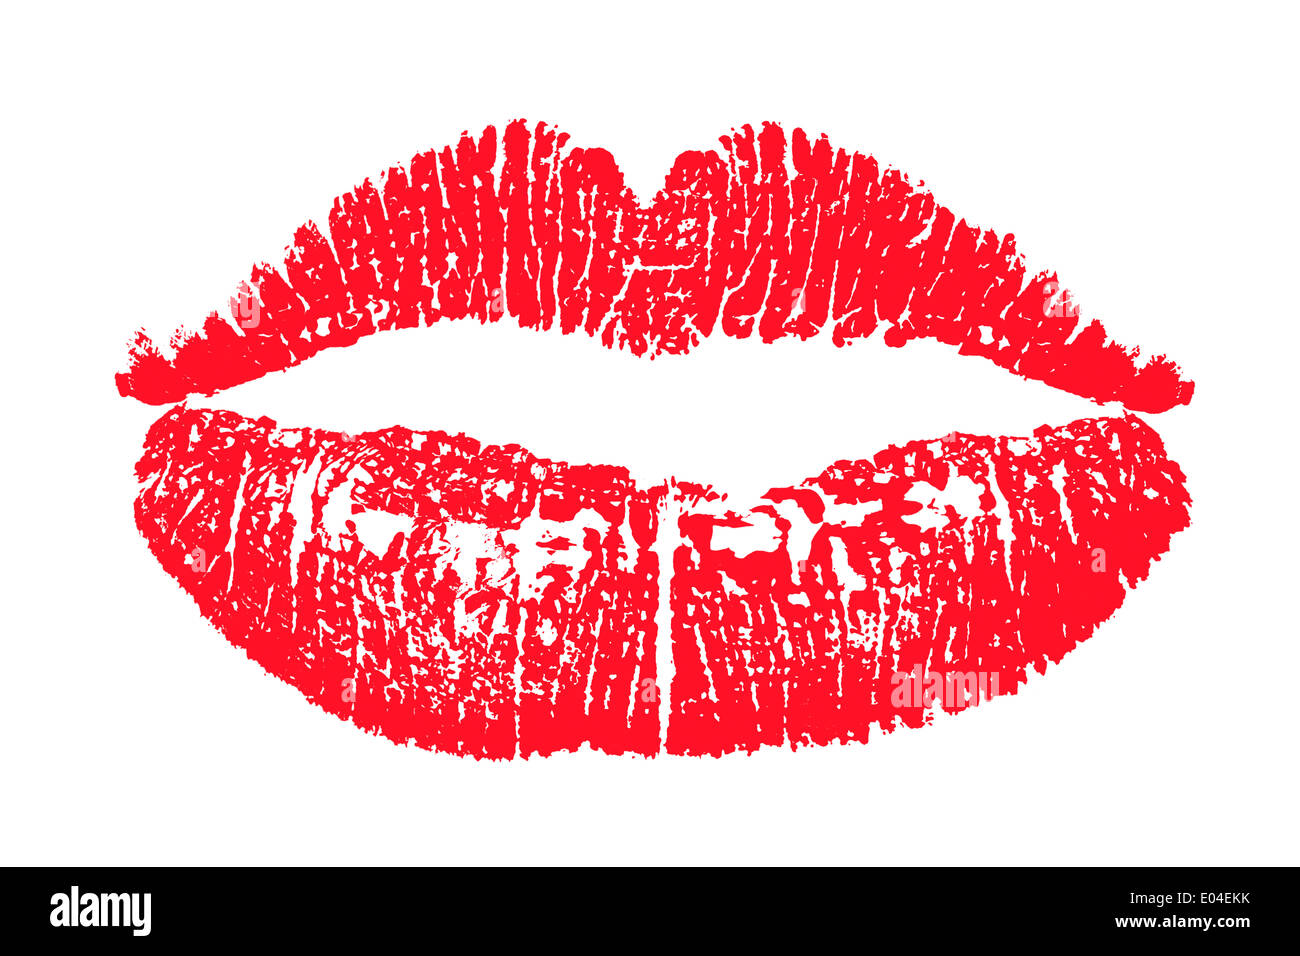 Red Lipstick Kiss Marks Isolated On White Background. Stock Photo